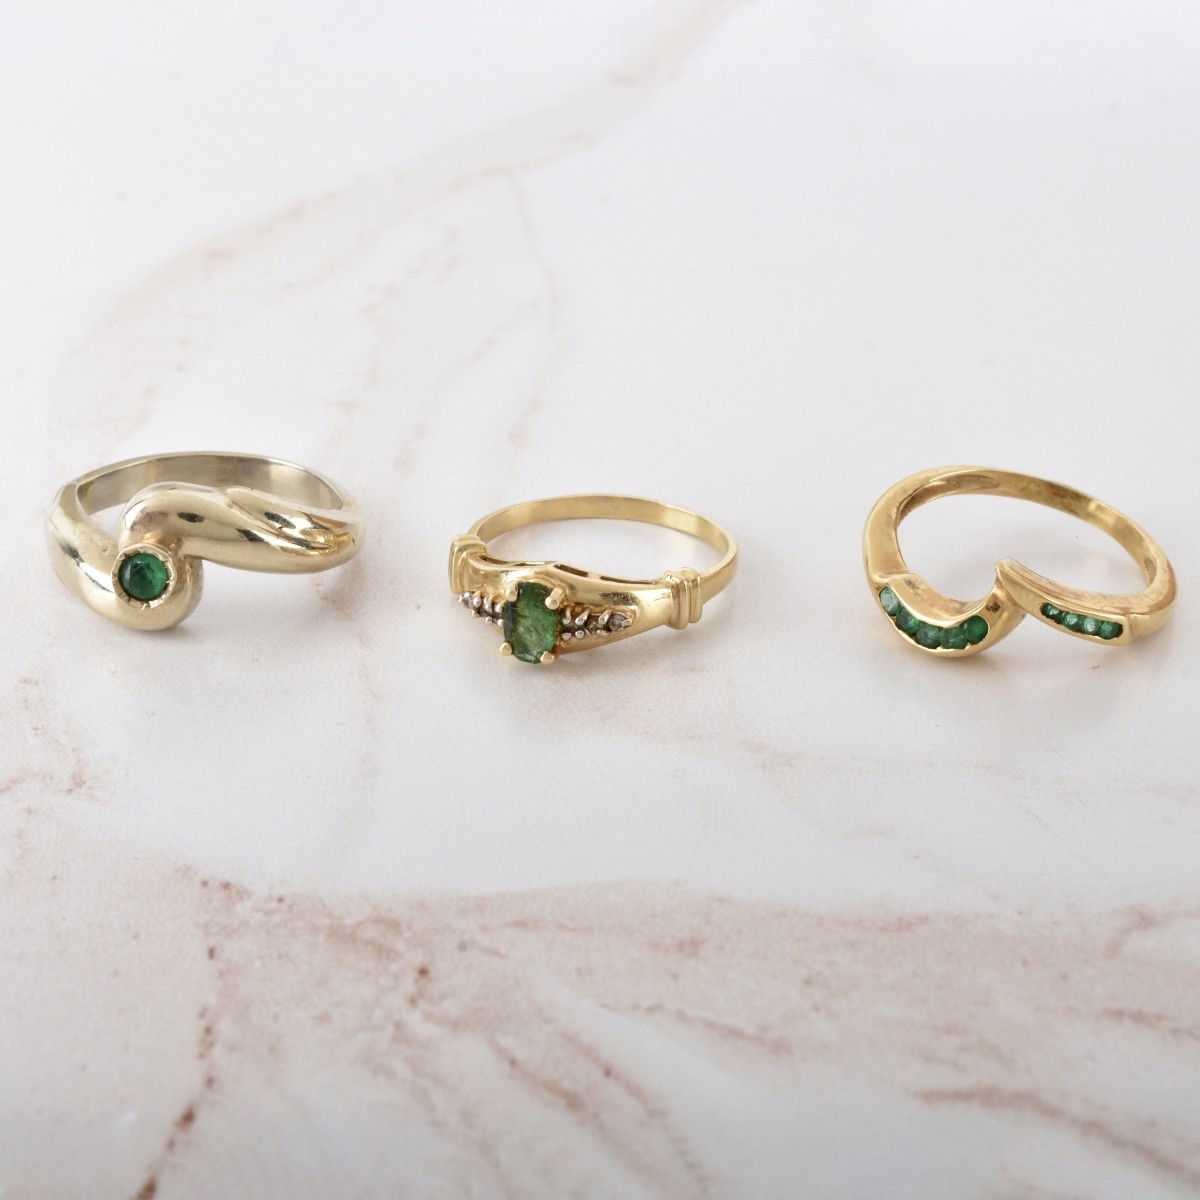 Emerald and 14K Rings